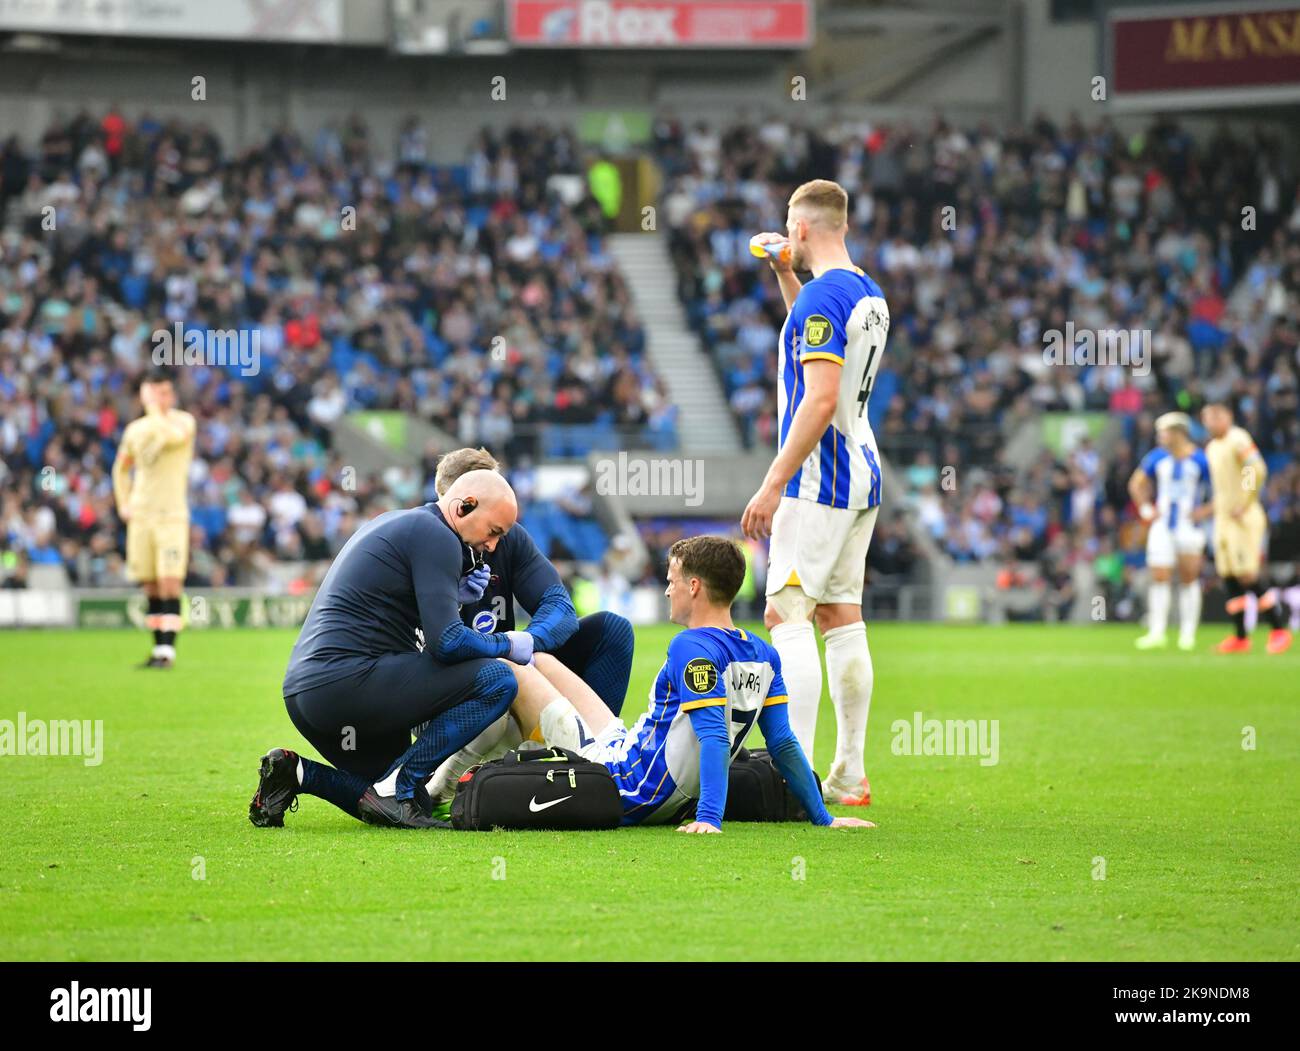 Brighton, UK. 29th Oct, 2022. Solly March of Brighton and Hove Albion receives treatment during the Premier League match between Brighton & Hove Albion and Chelsea at The Amex on October 29th 2022 in Brighton, England. (Photo by Jeff Mood/phcimages.com) Credit: PHC Images/Alamy Live News Stock Photo